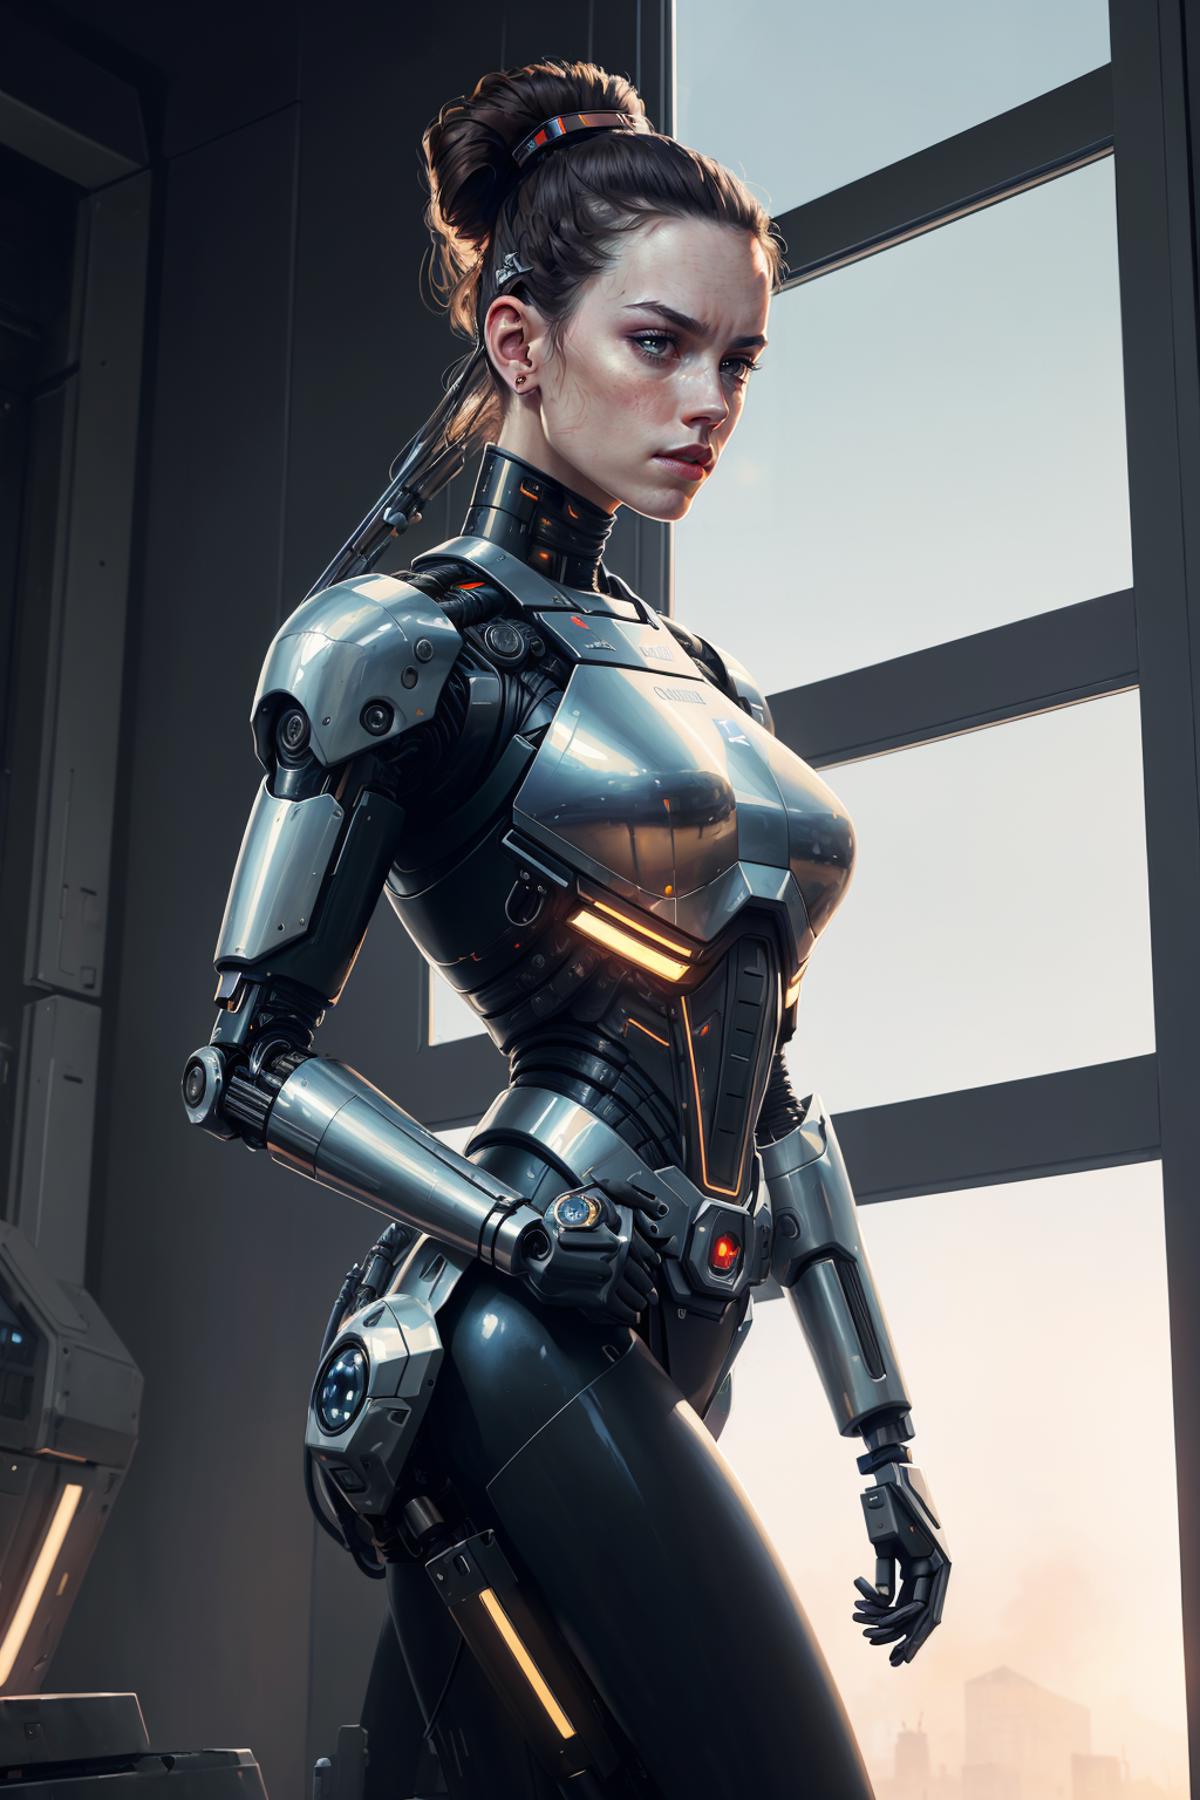 AI model image by TheNamelessKing